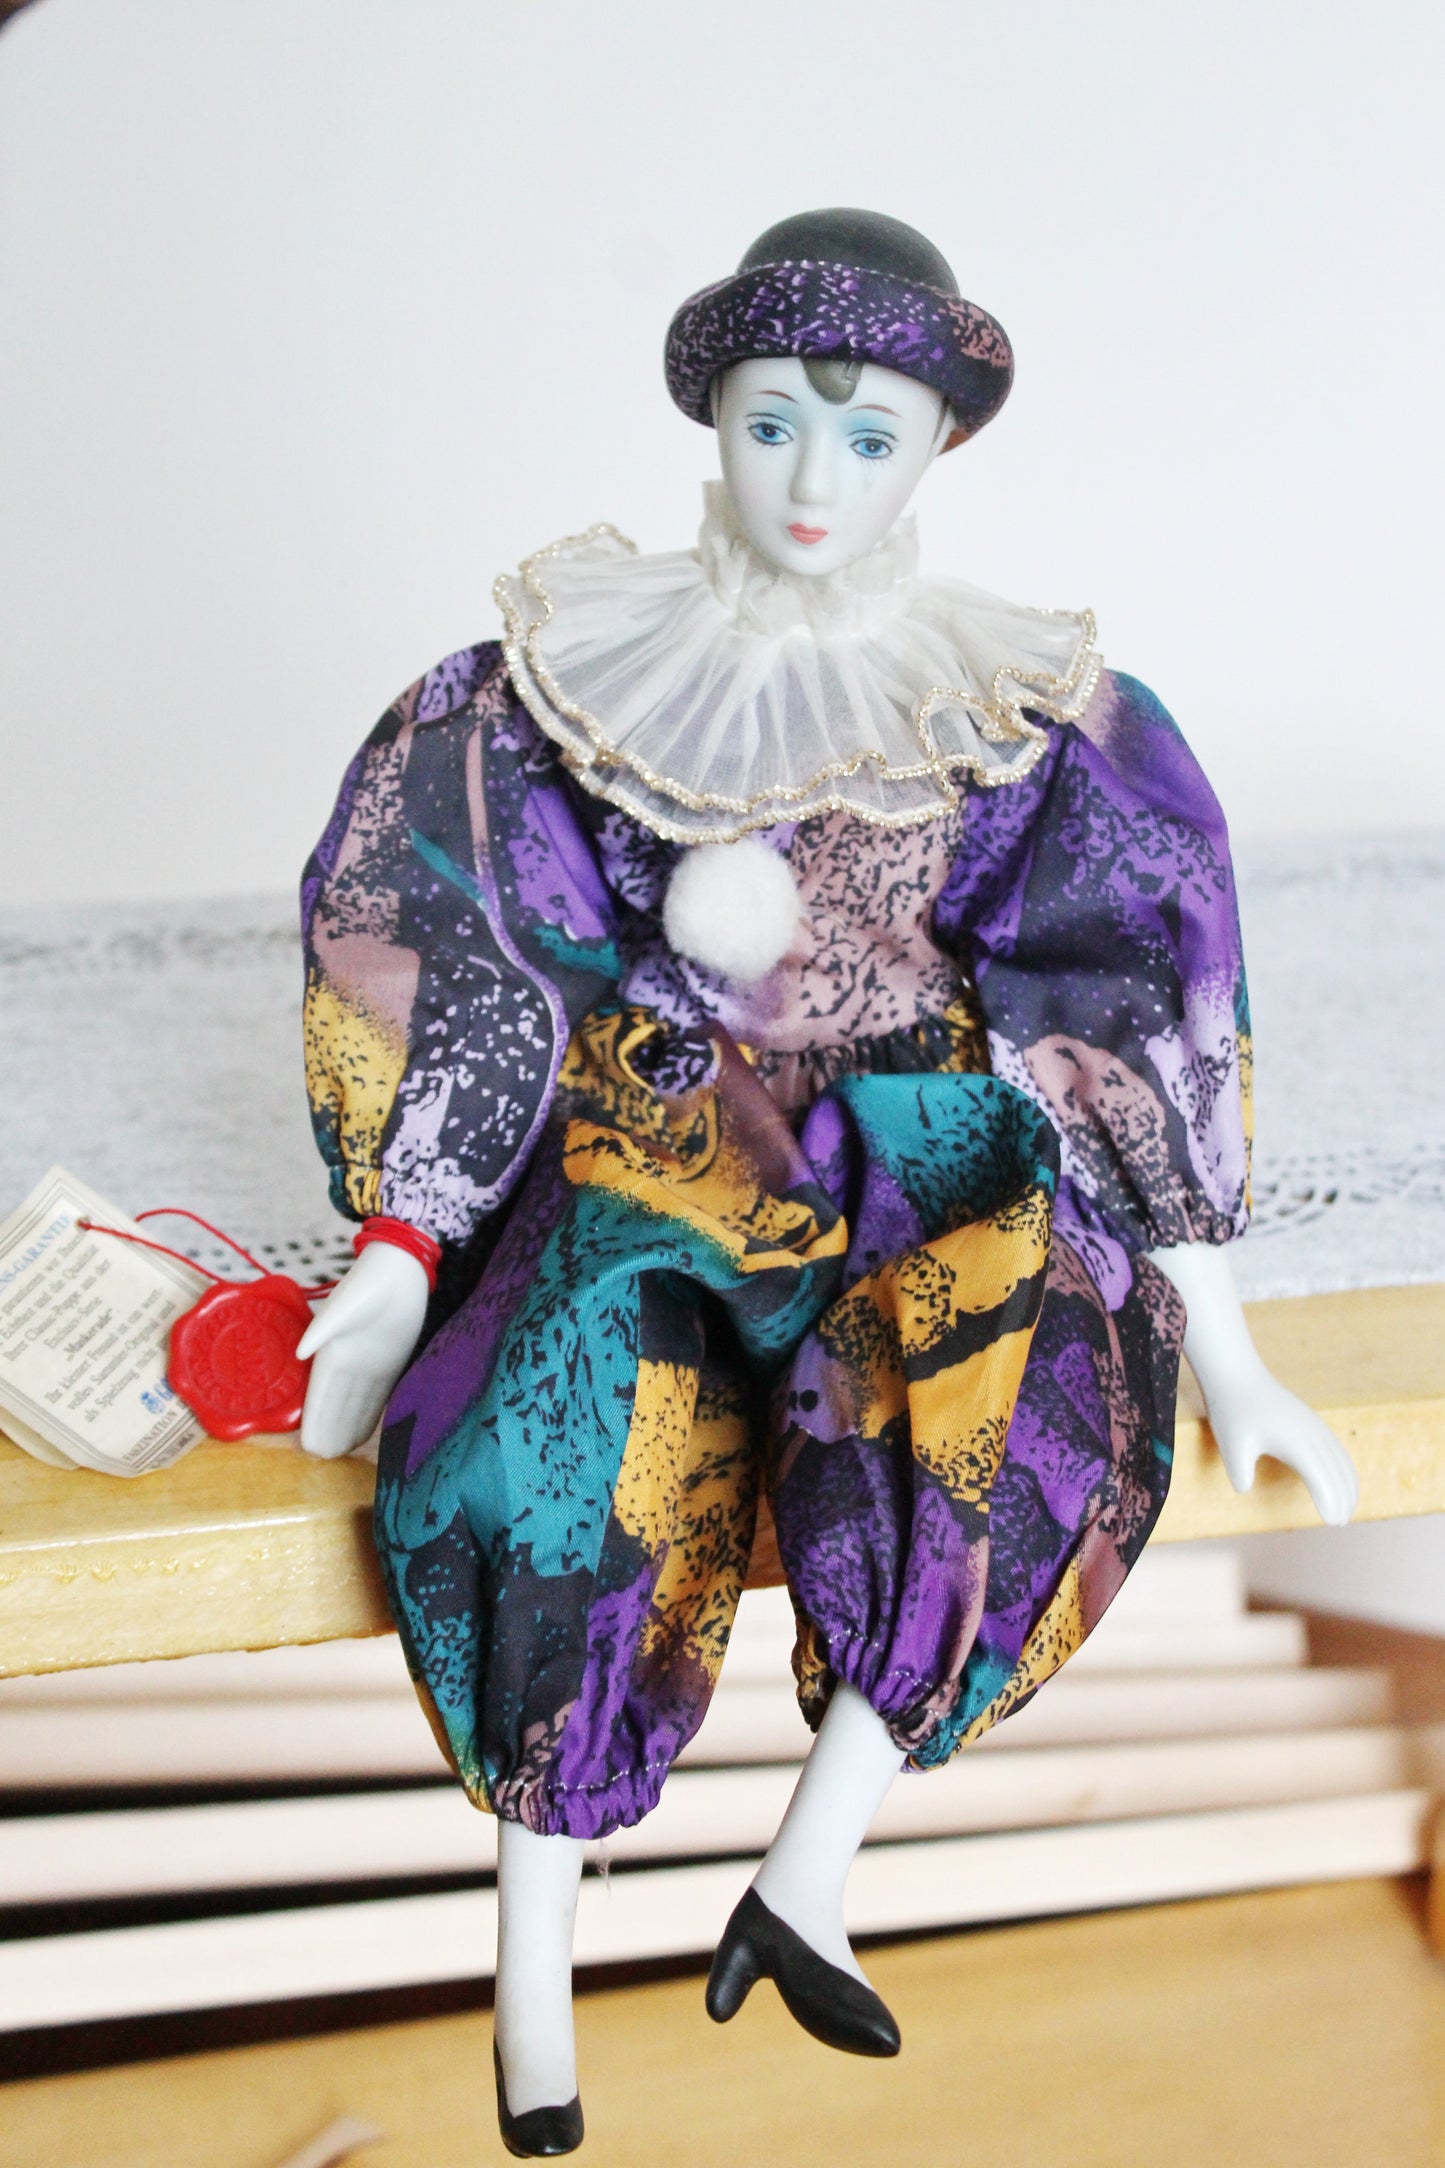 Vintage porcelain Venetian doll - Harlequin - 15 inches- collectible doll - porcelain doll - decor doll - 1980s